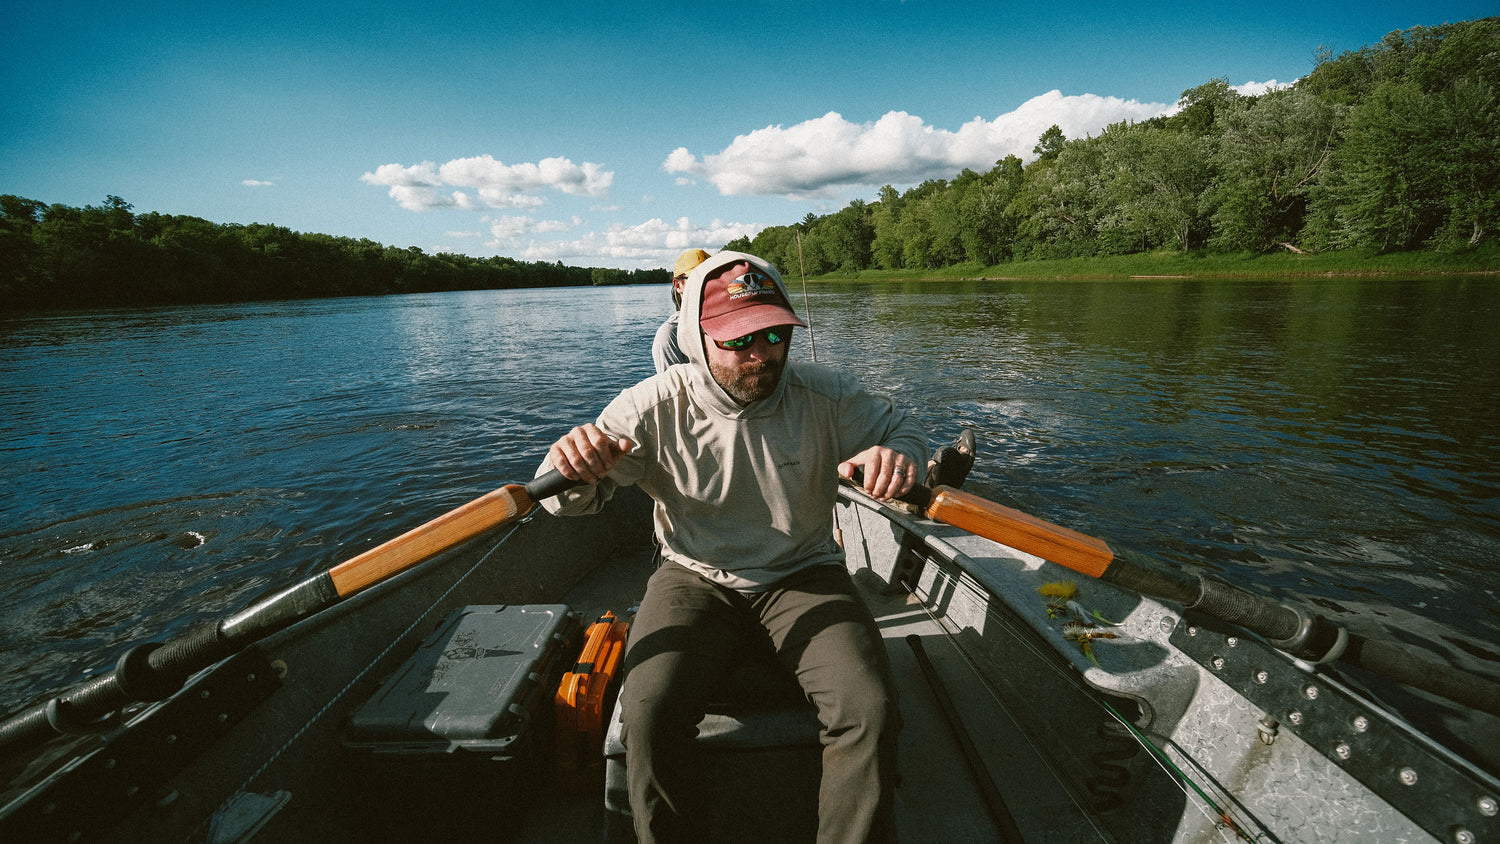 Image of Bret rowing a boat with a client